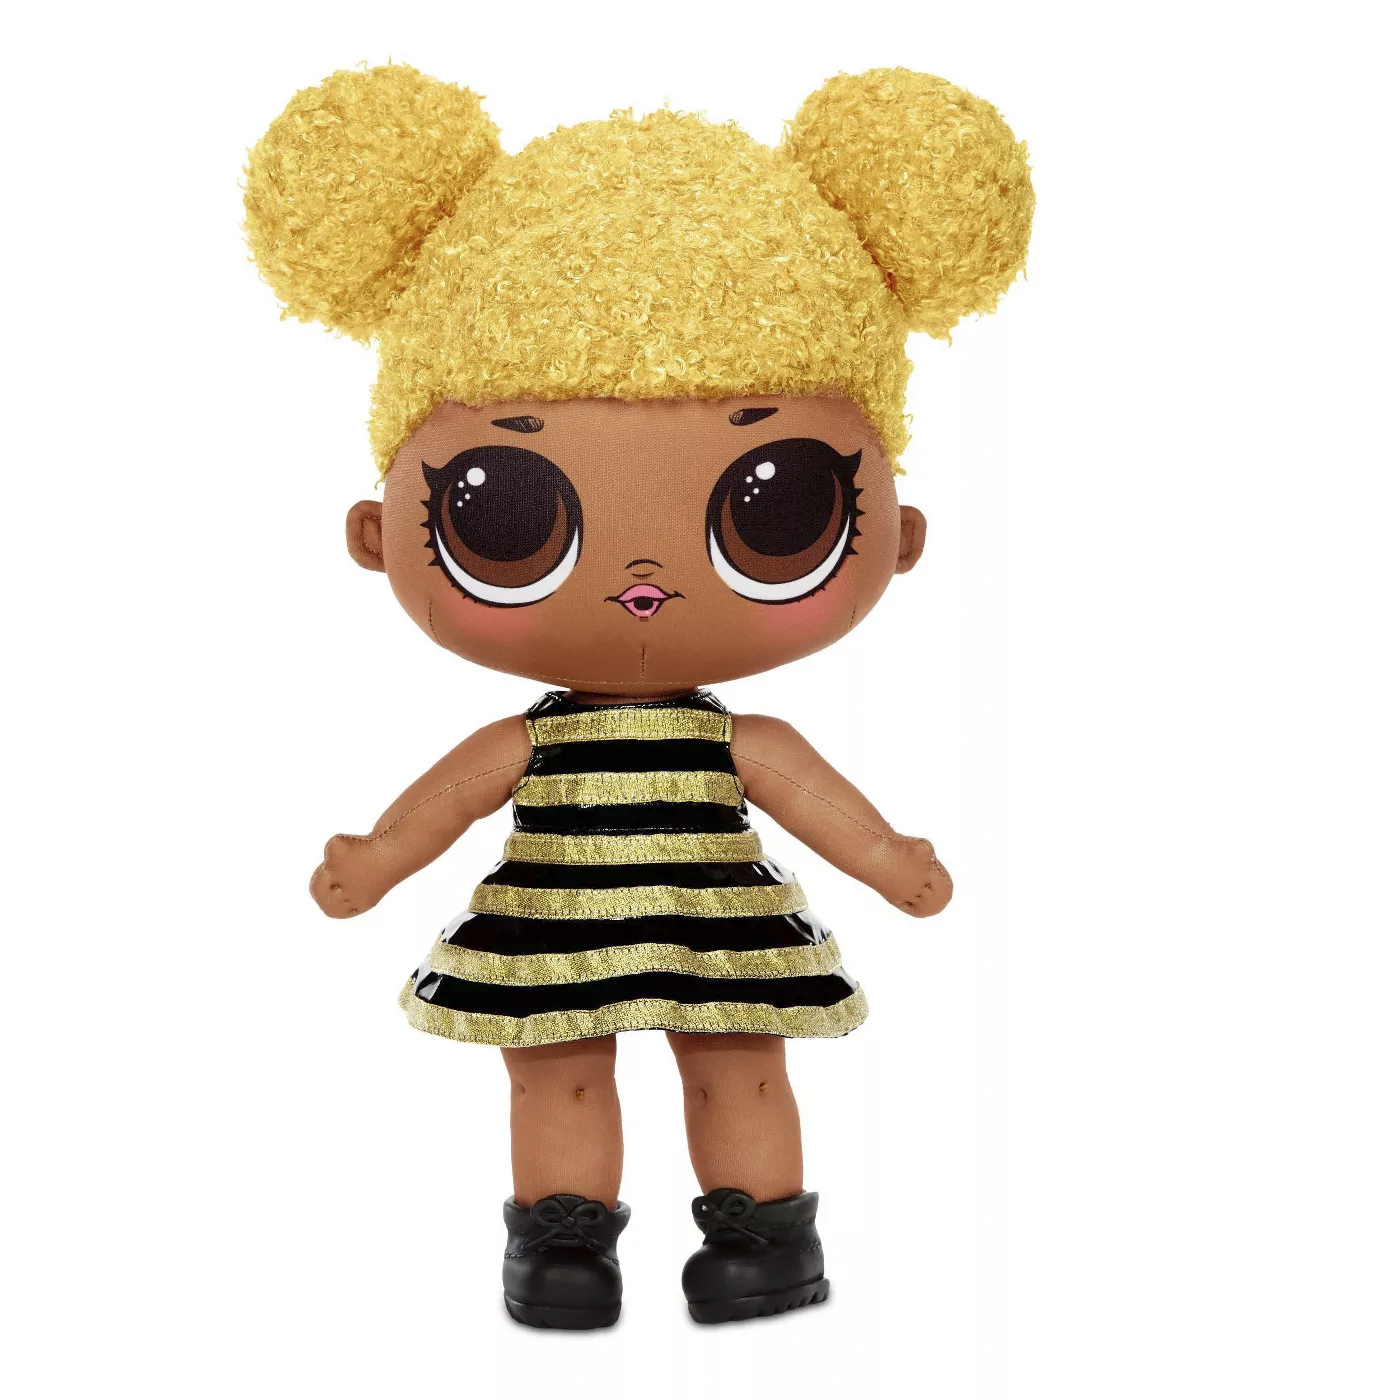 L.O.L. Surprise! Huggable Plush Queen Bee and Neon QT dolls - YouLoveIt.com